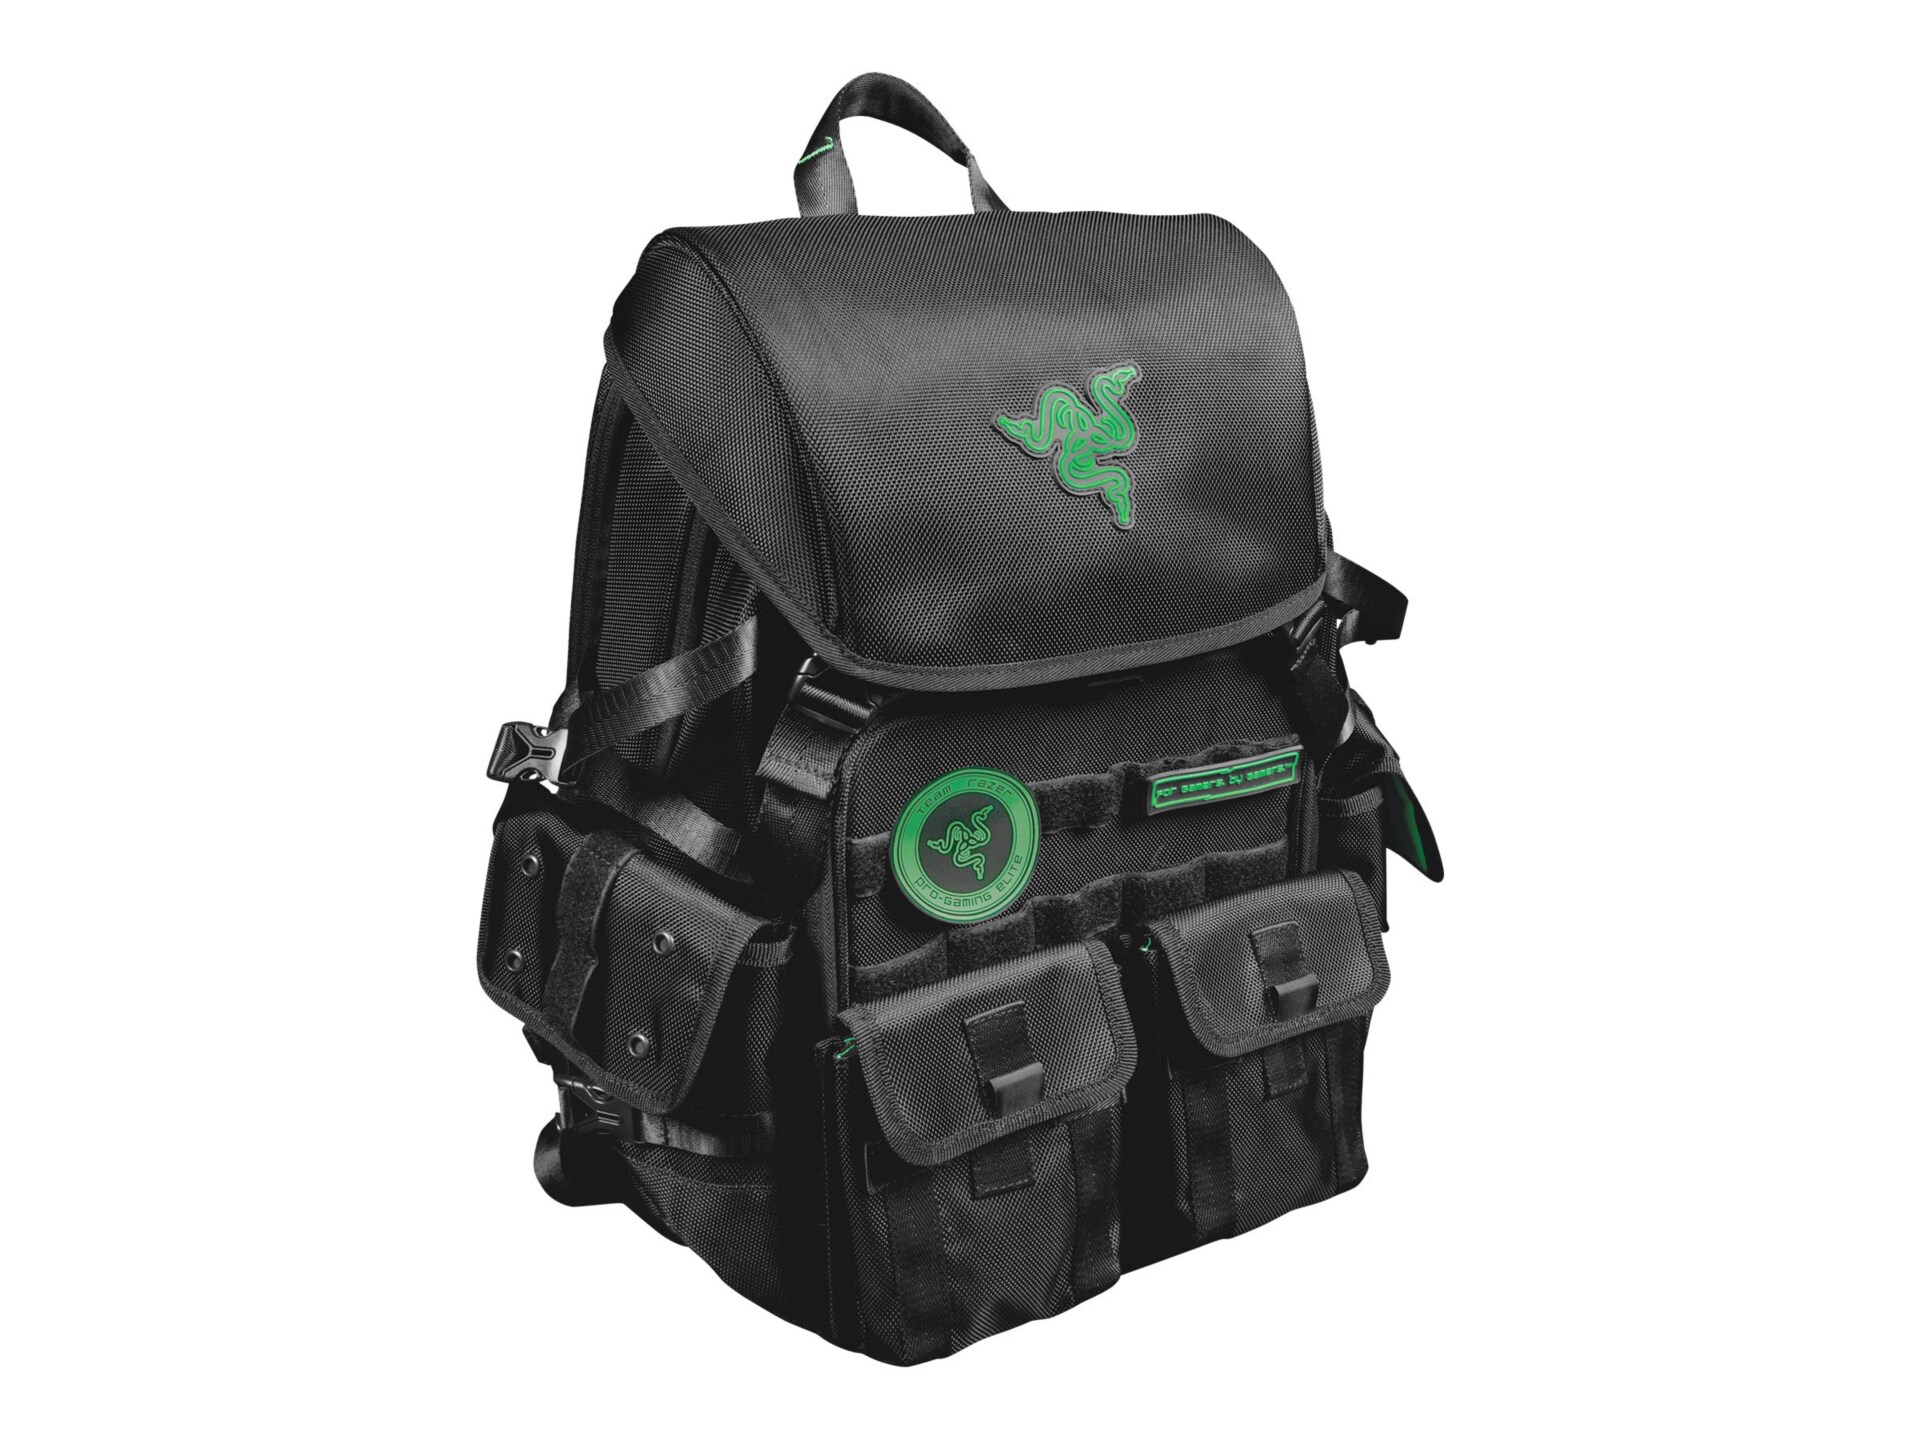 Mobile Edge Razer Tactical Pro 17.3" Notebook & Tablet Gaming Backpack note